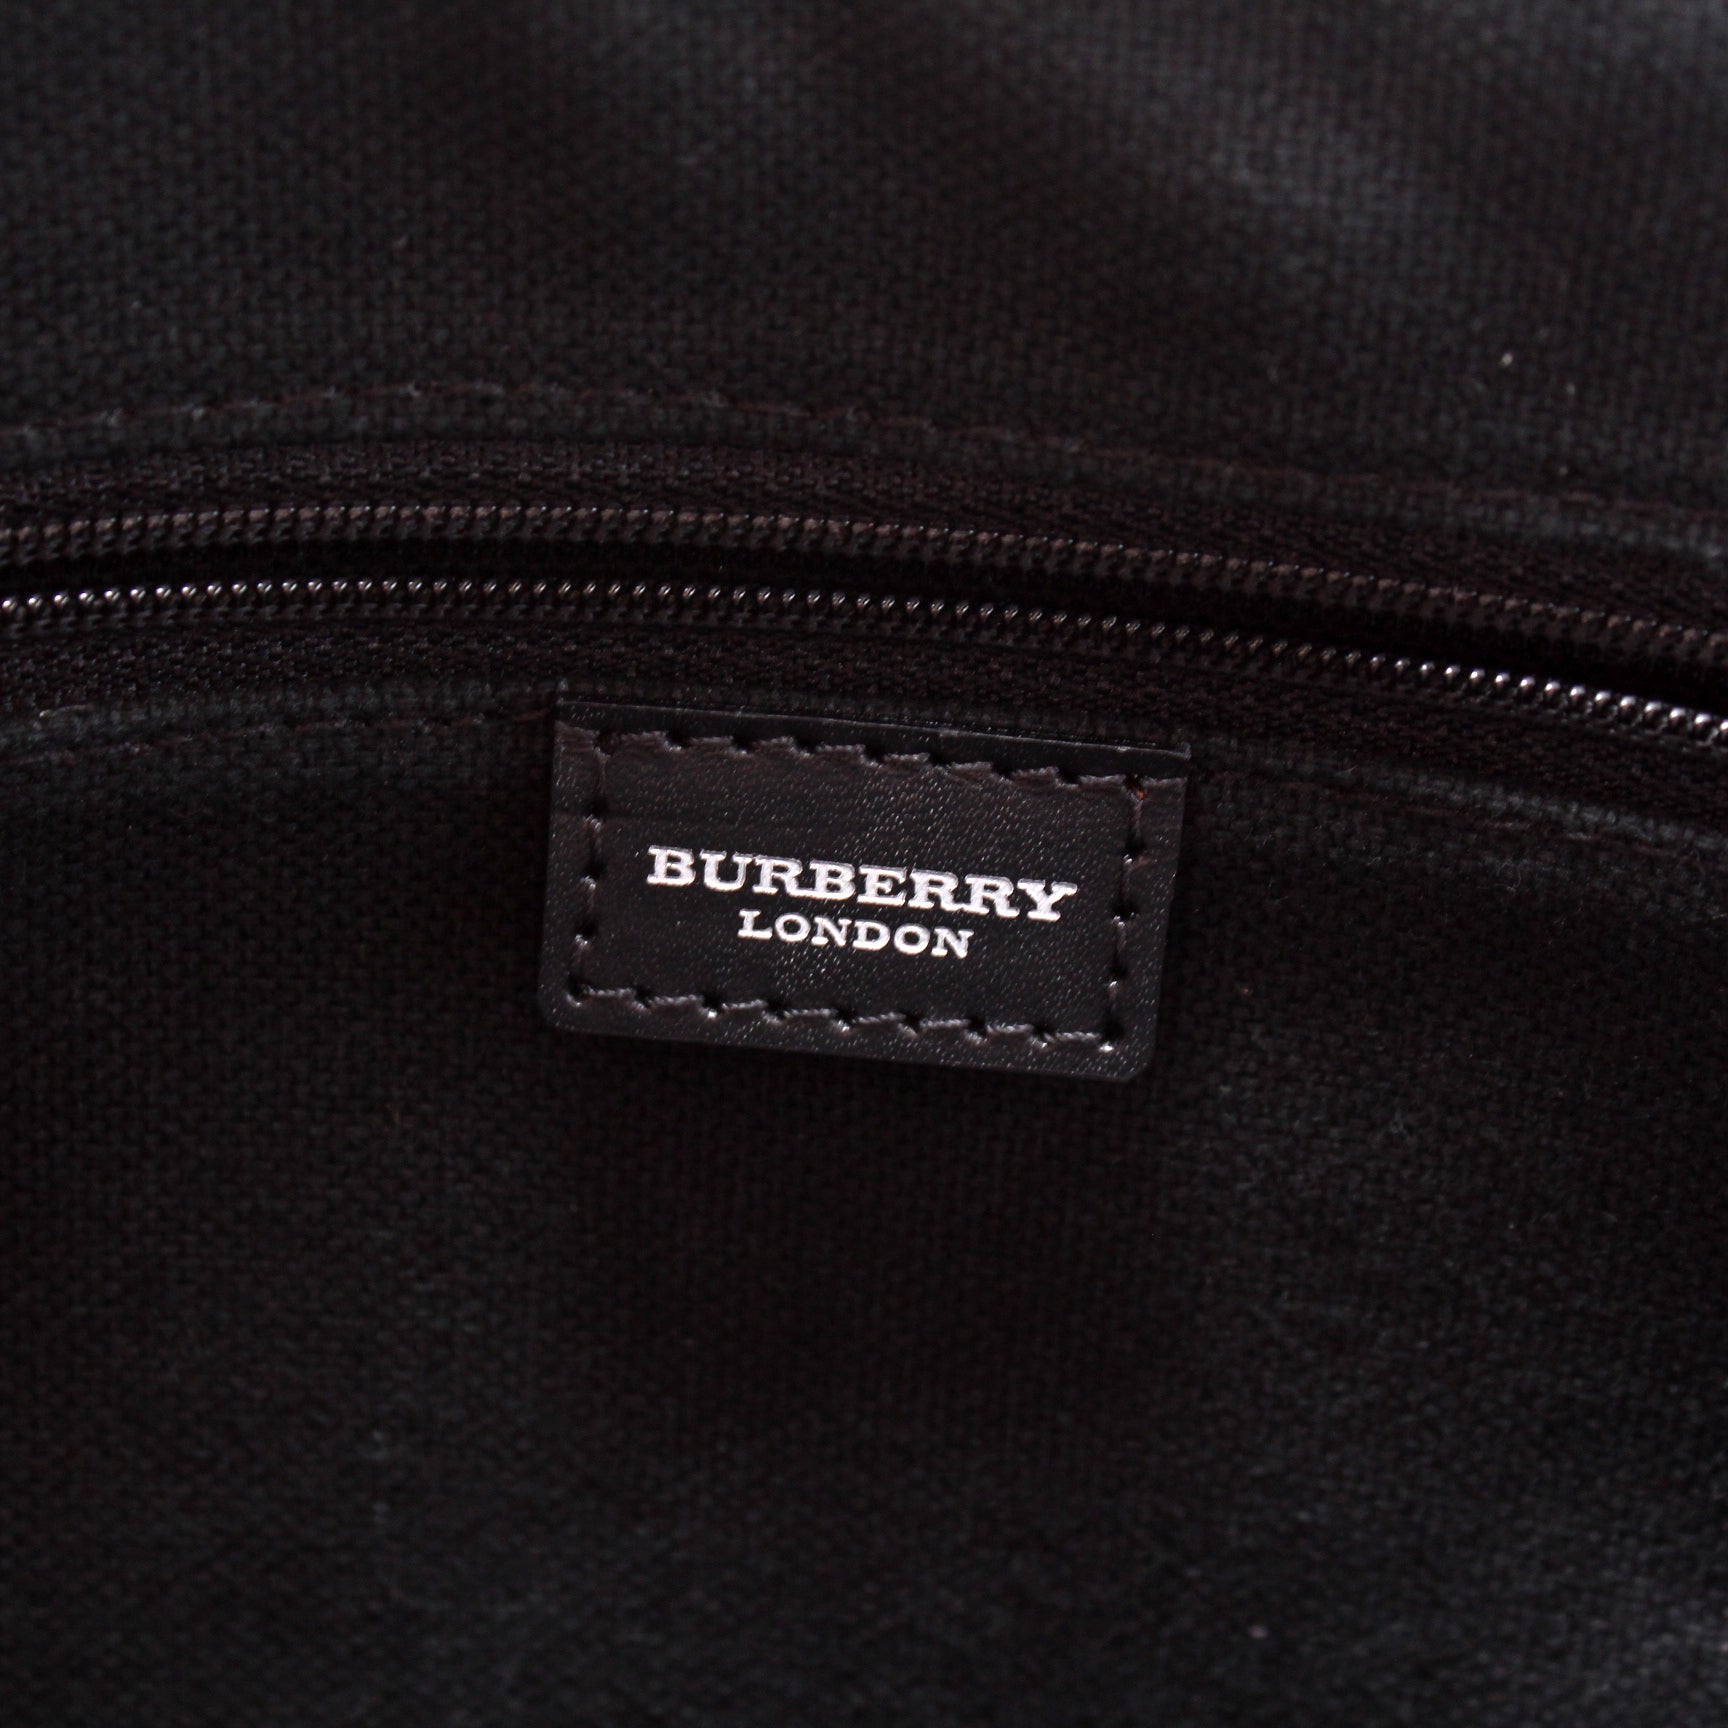 Sold at Auction: BURBERRY Nova Check Dome Leather Satchel, Bag